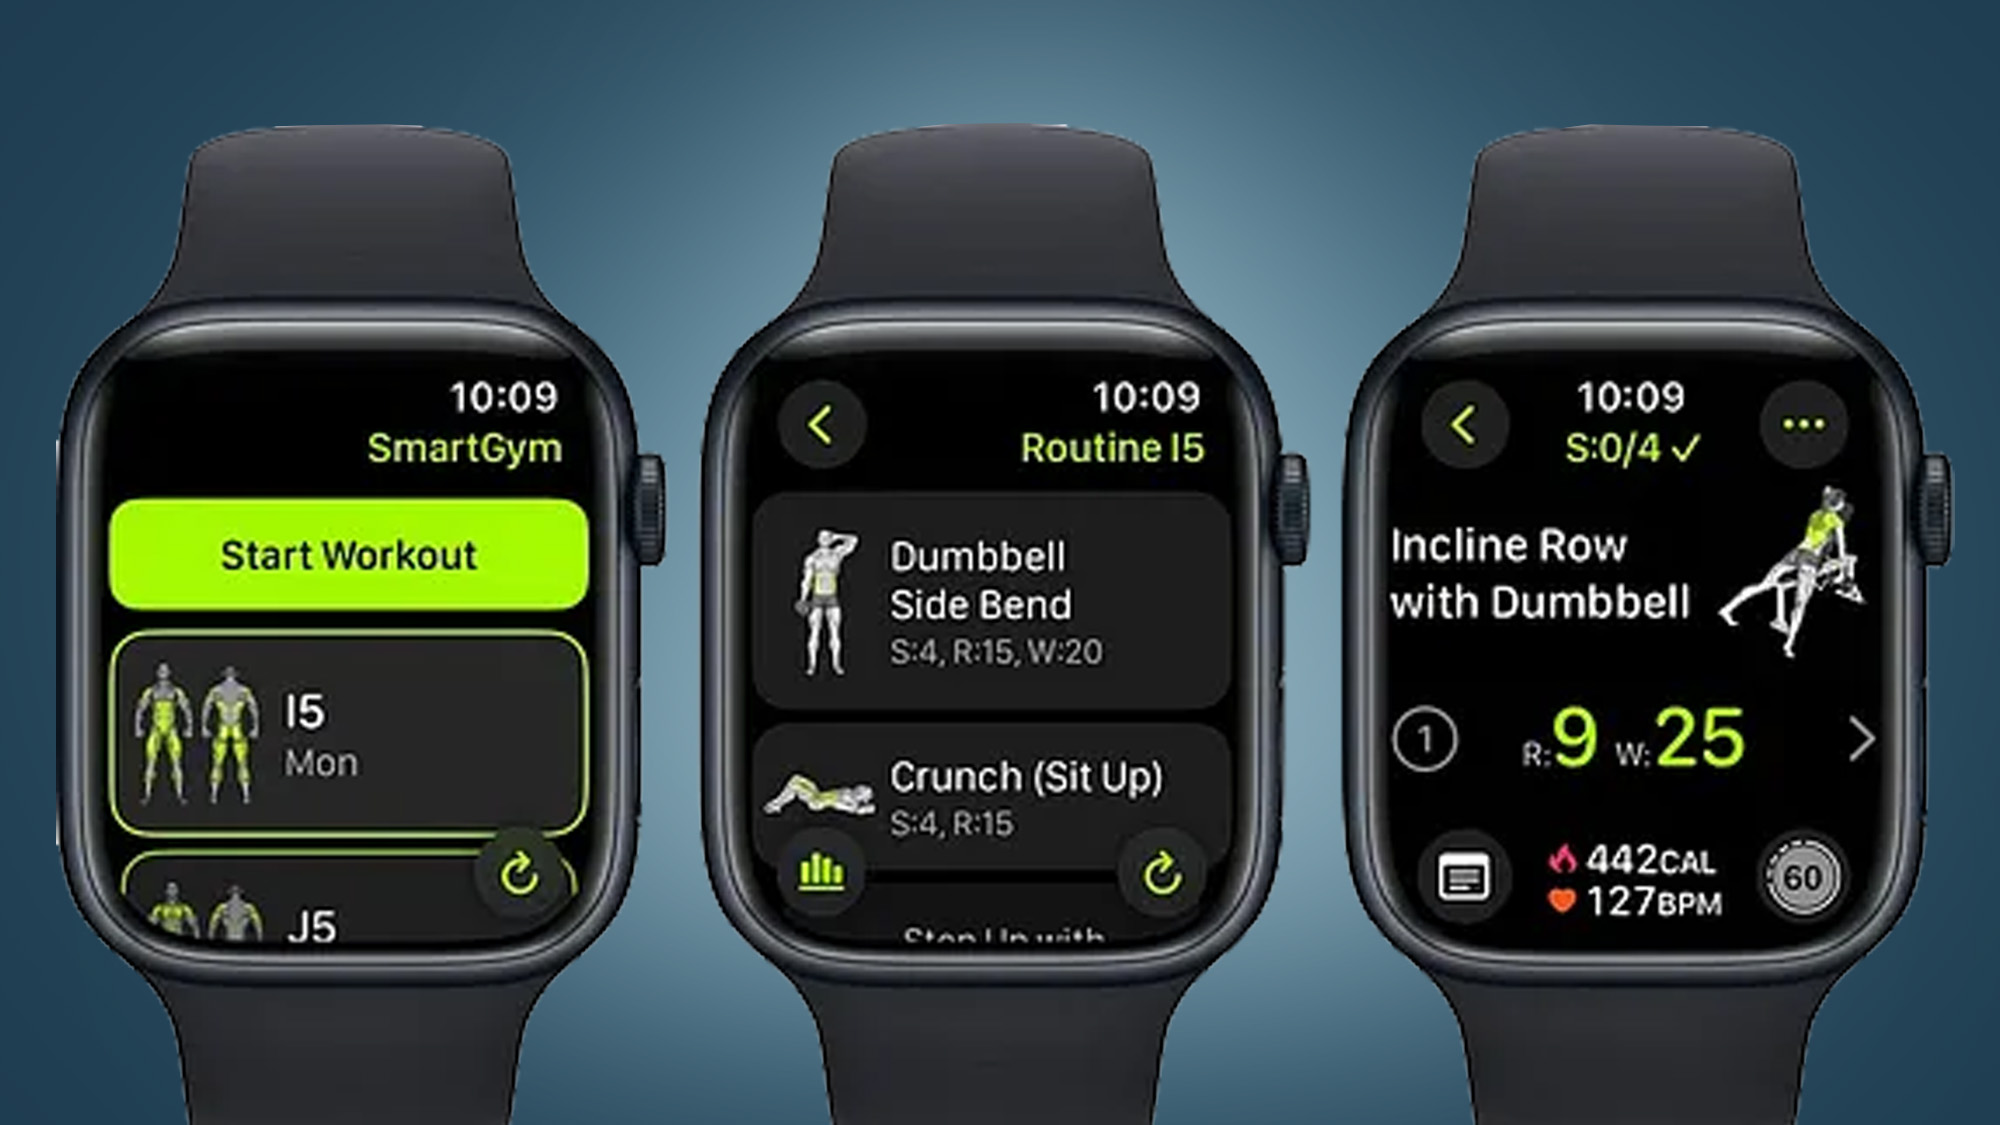 Three Apple Watches on a blue background displaying the SmartGym app